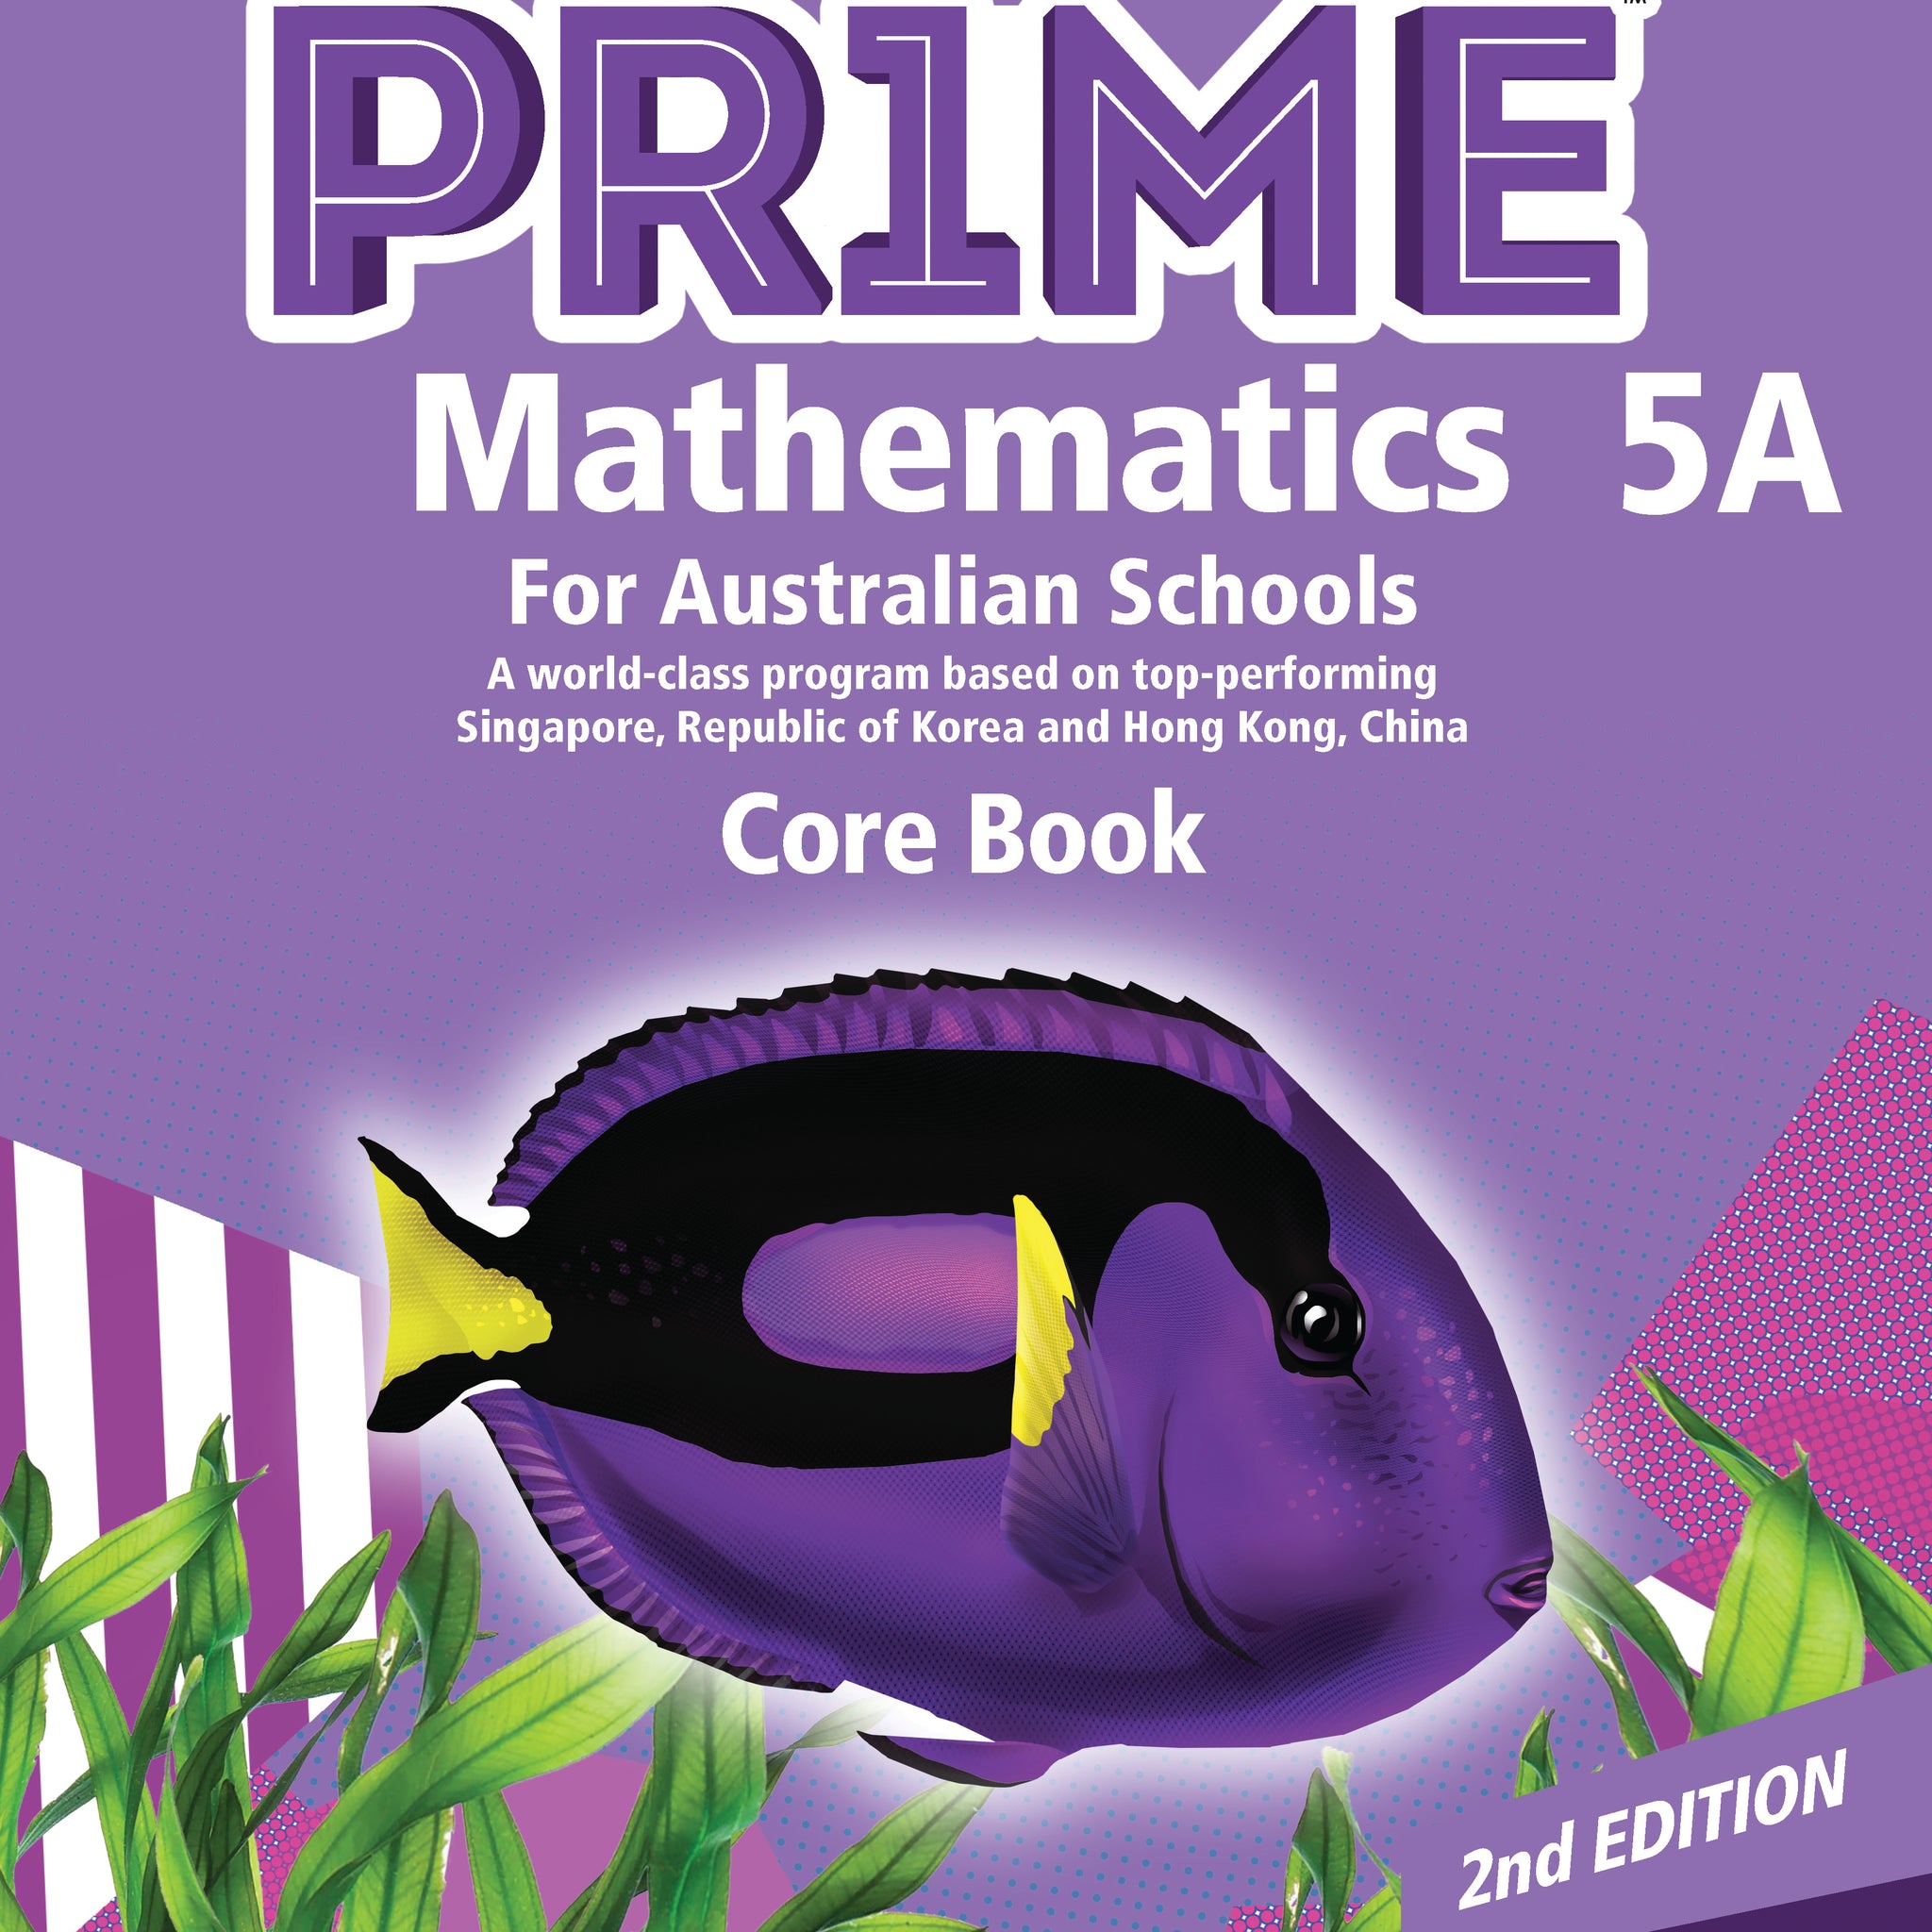 PRIME AUS Student Book 5A (2nd Edition)